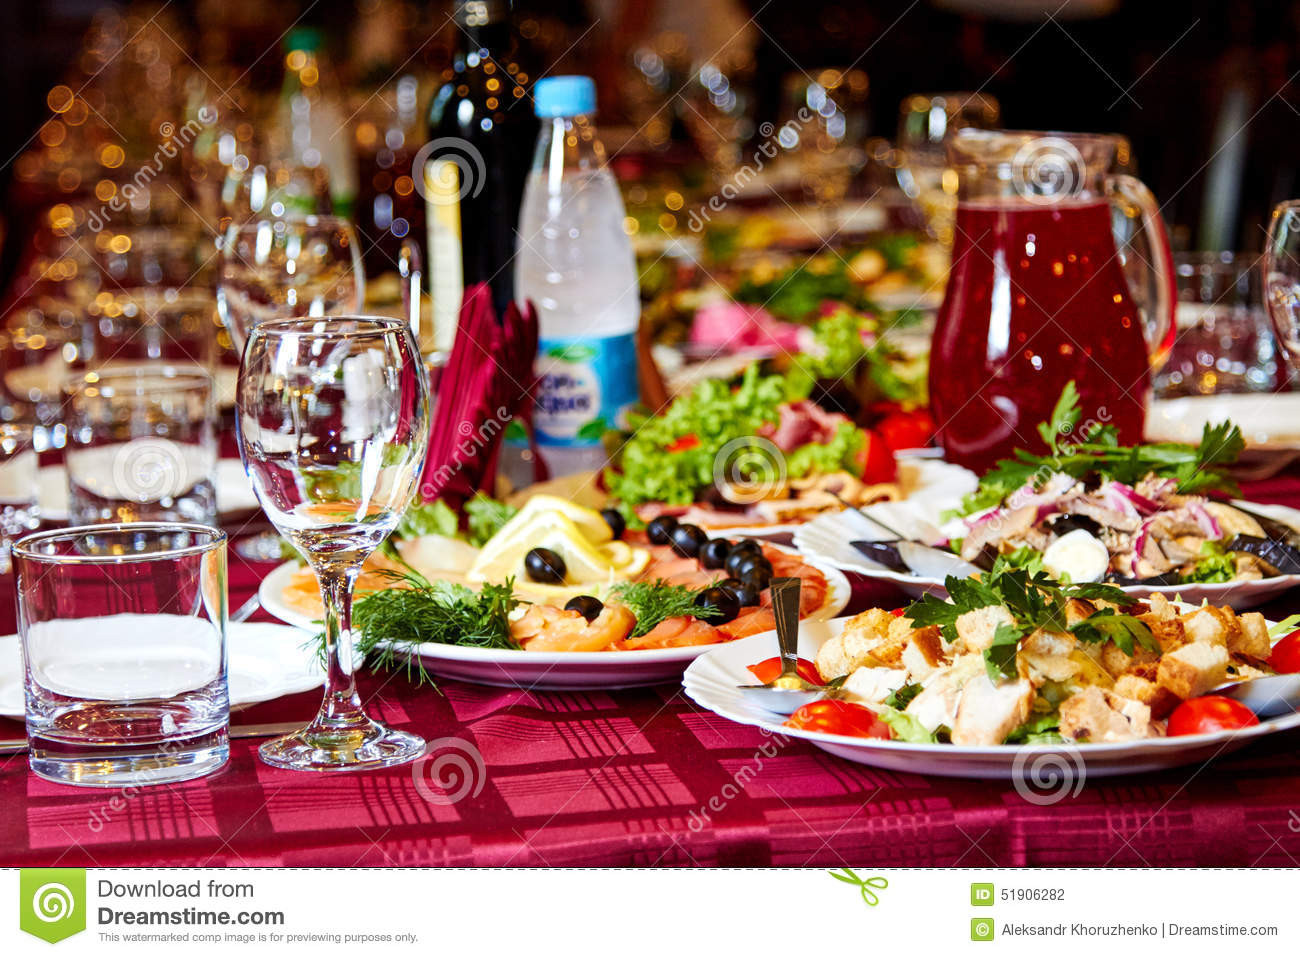 Party Ideas Food &amp; Drink
 Party Table With Alcohol Food And Drinks Stock